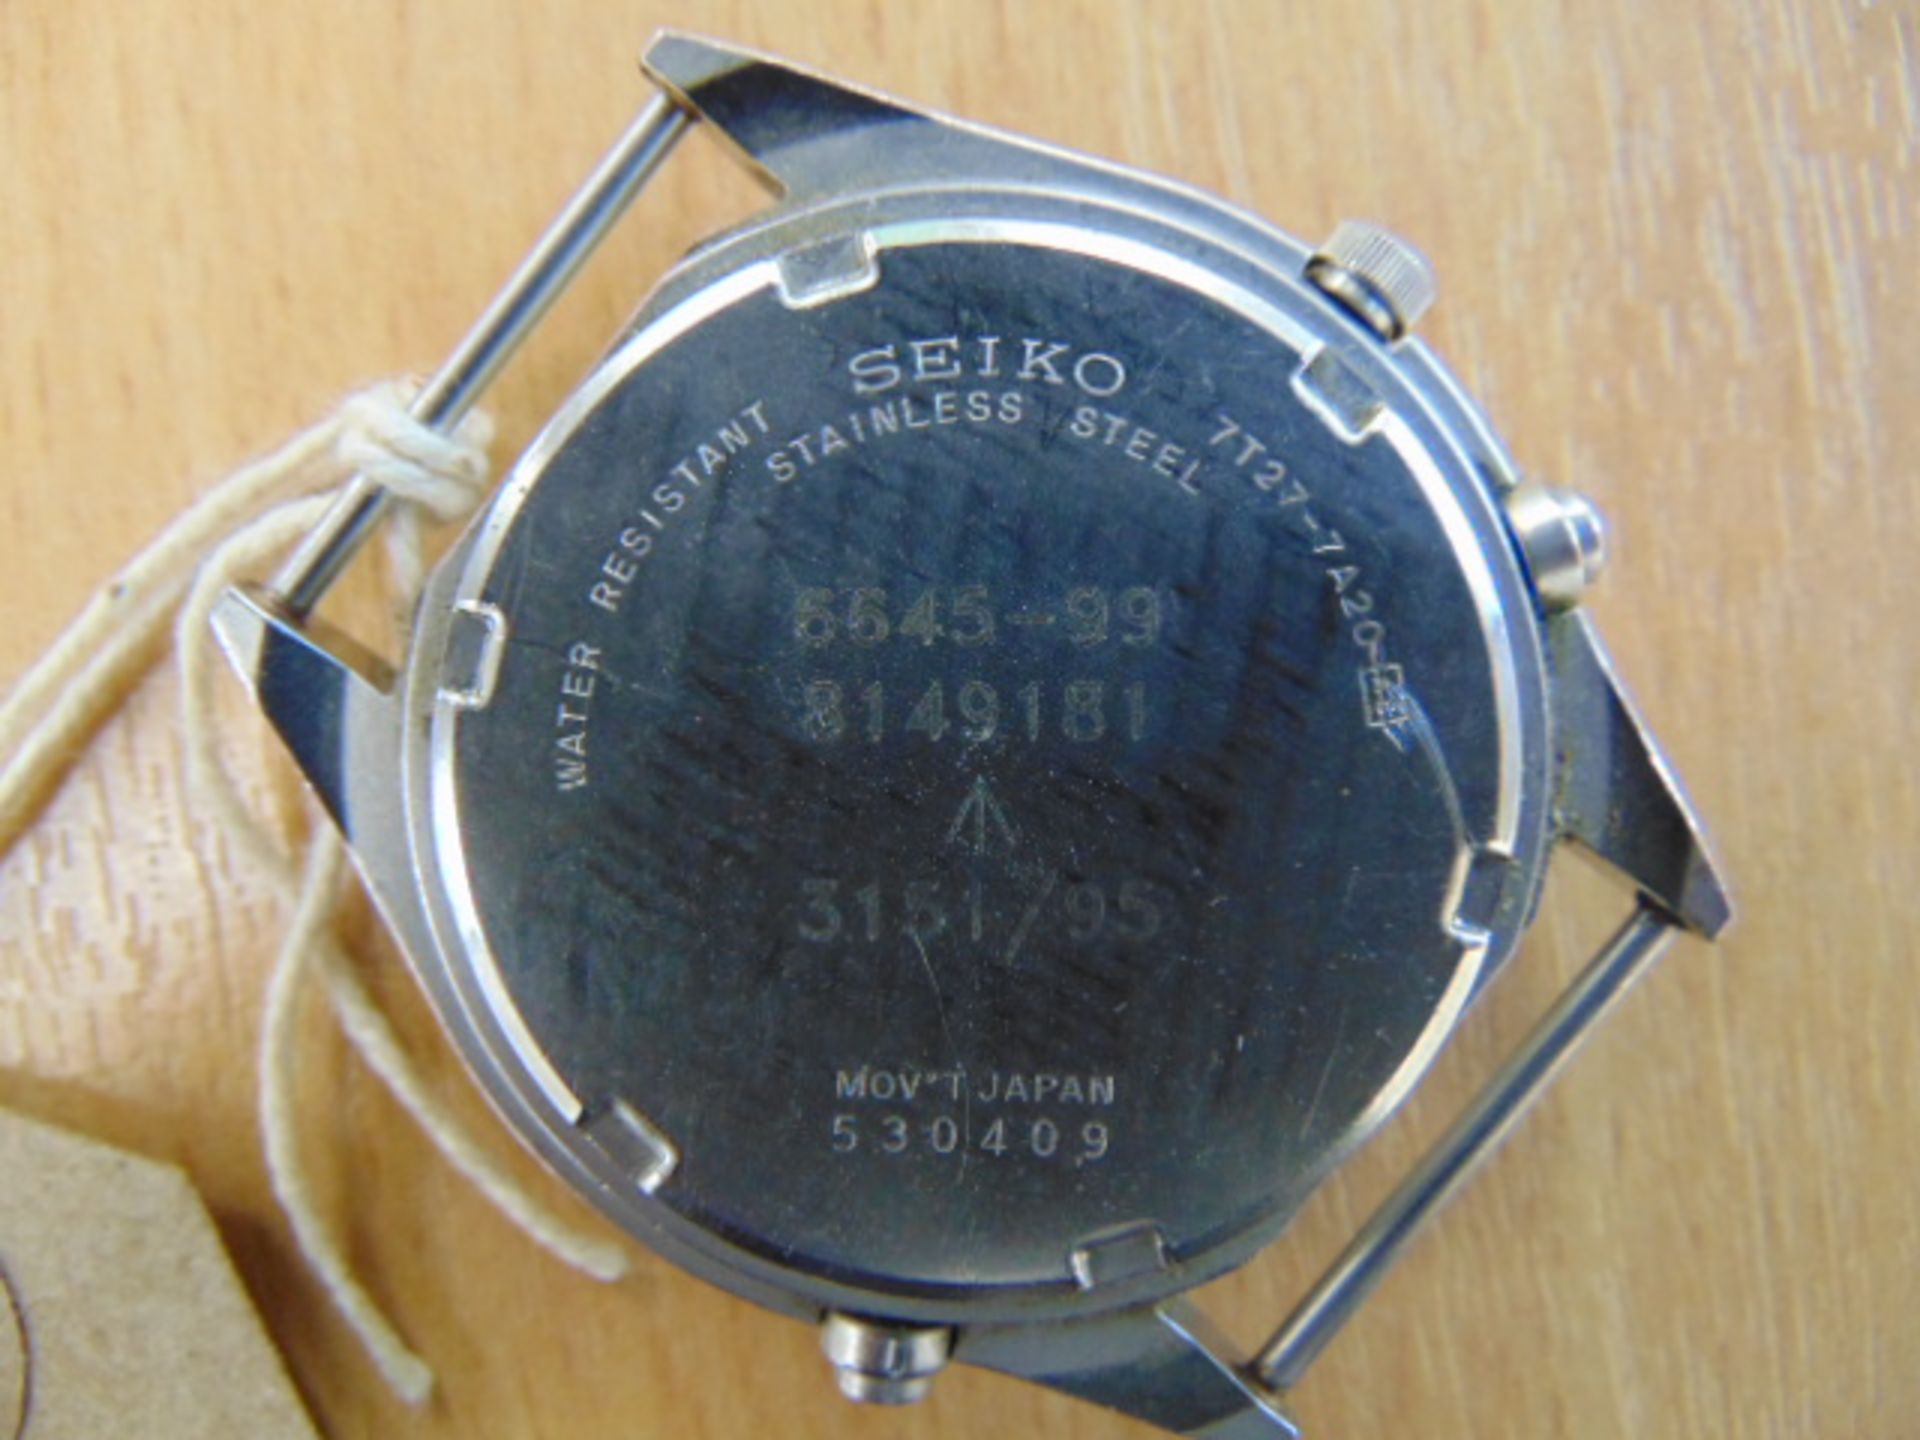 SEIKO GEN 2 RAF ISSUE PILOTS CHRONO DATED 1995 - Image 3 of 4